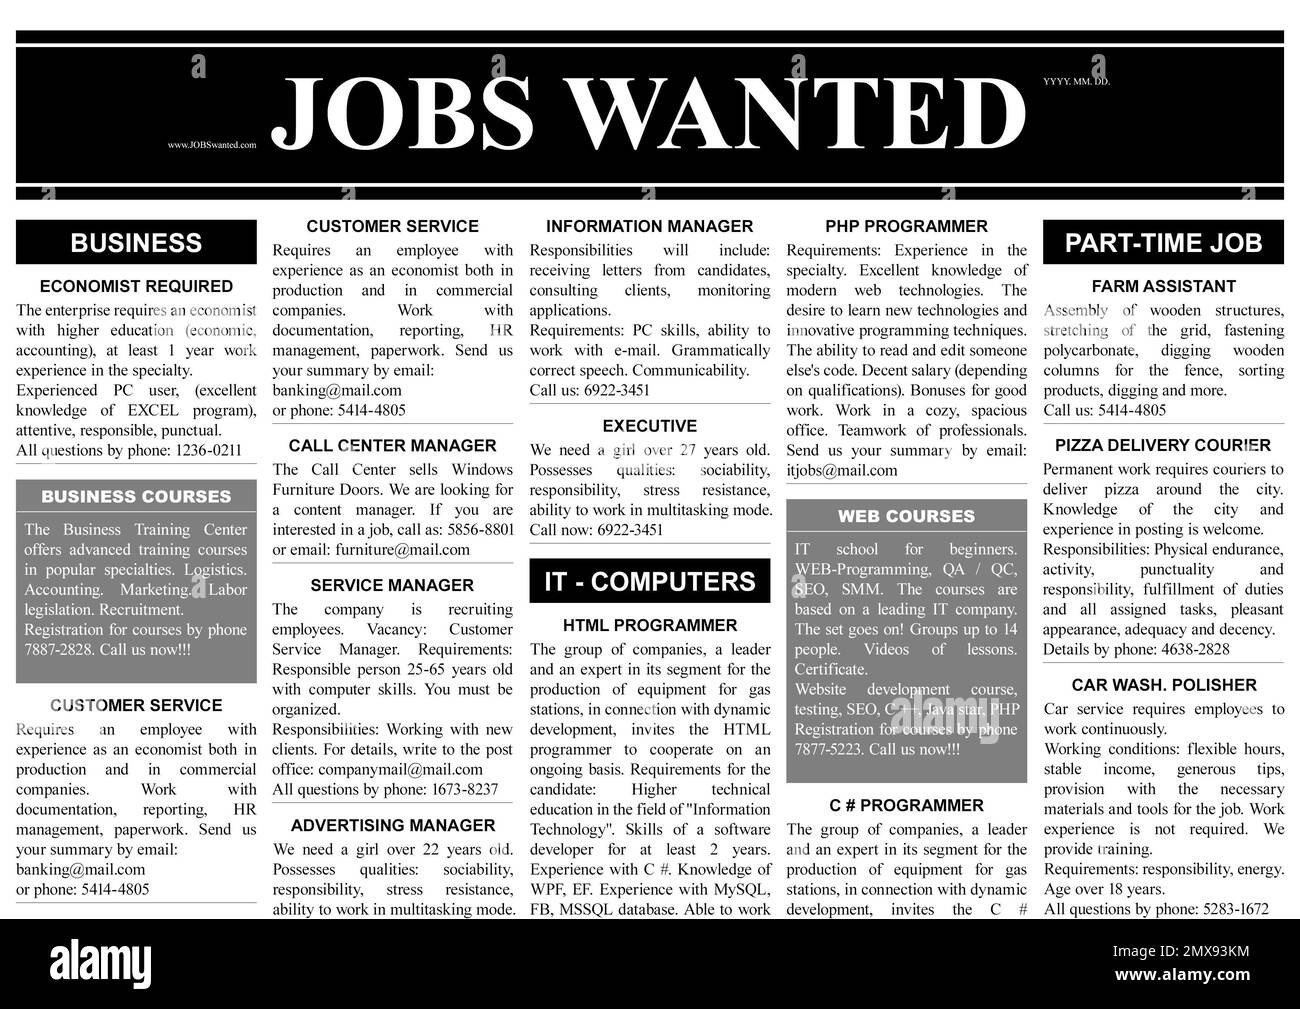 Job advertisements newspaper Black and White Stock Photos & Images - Alamy